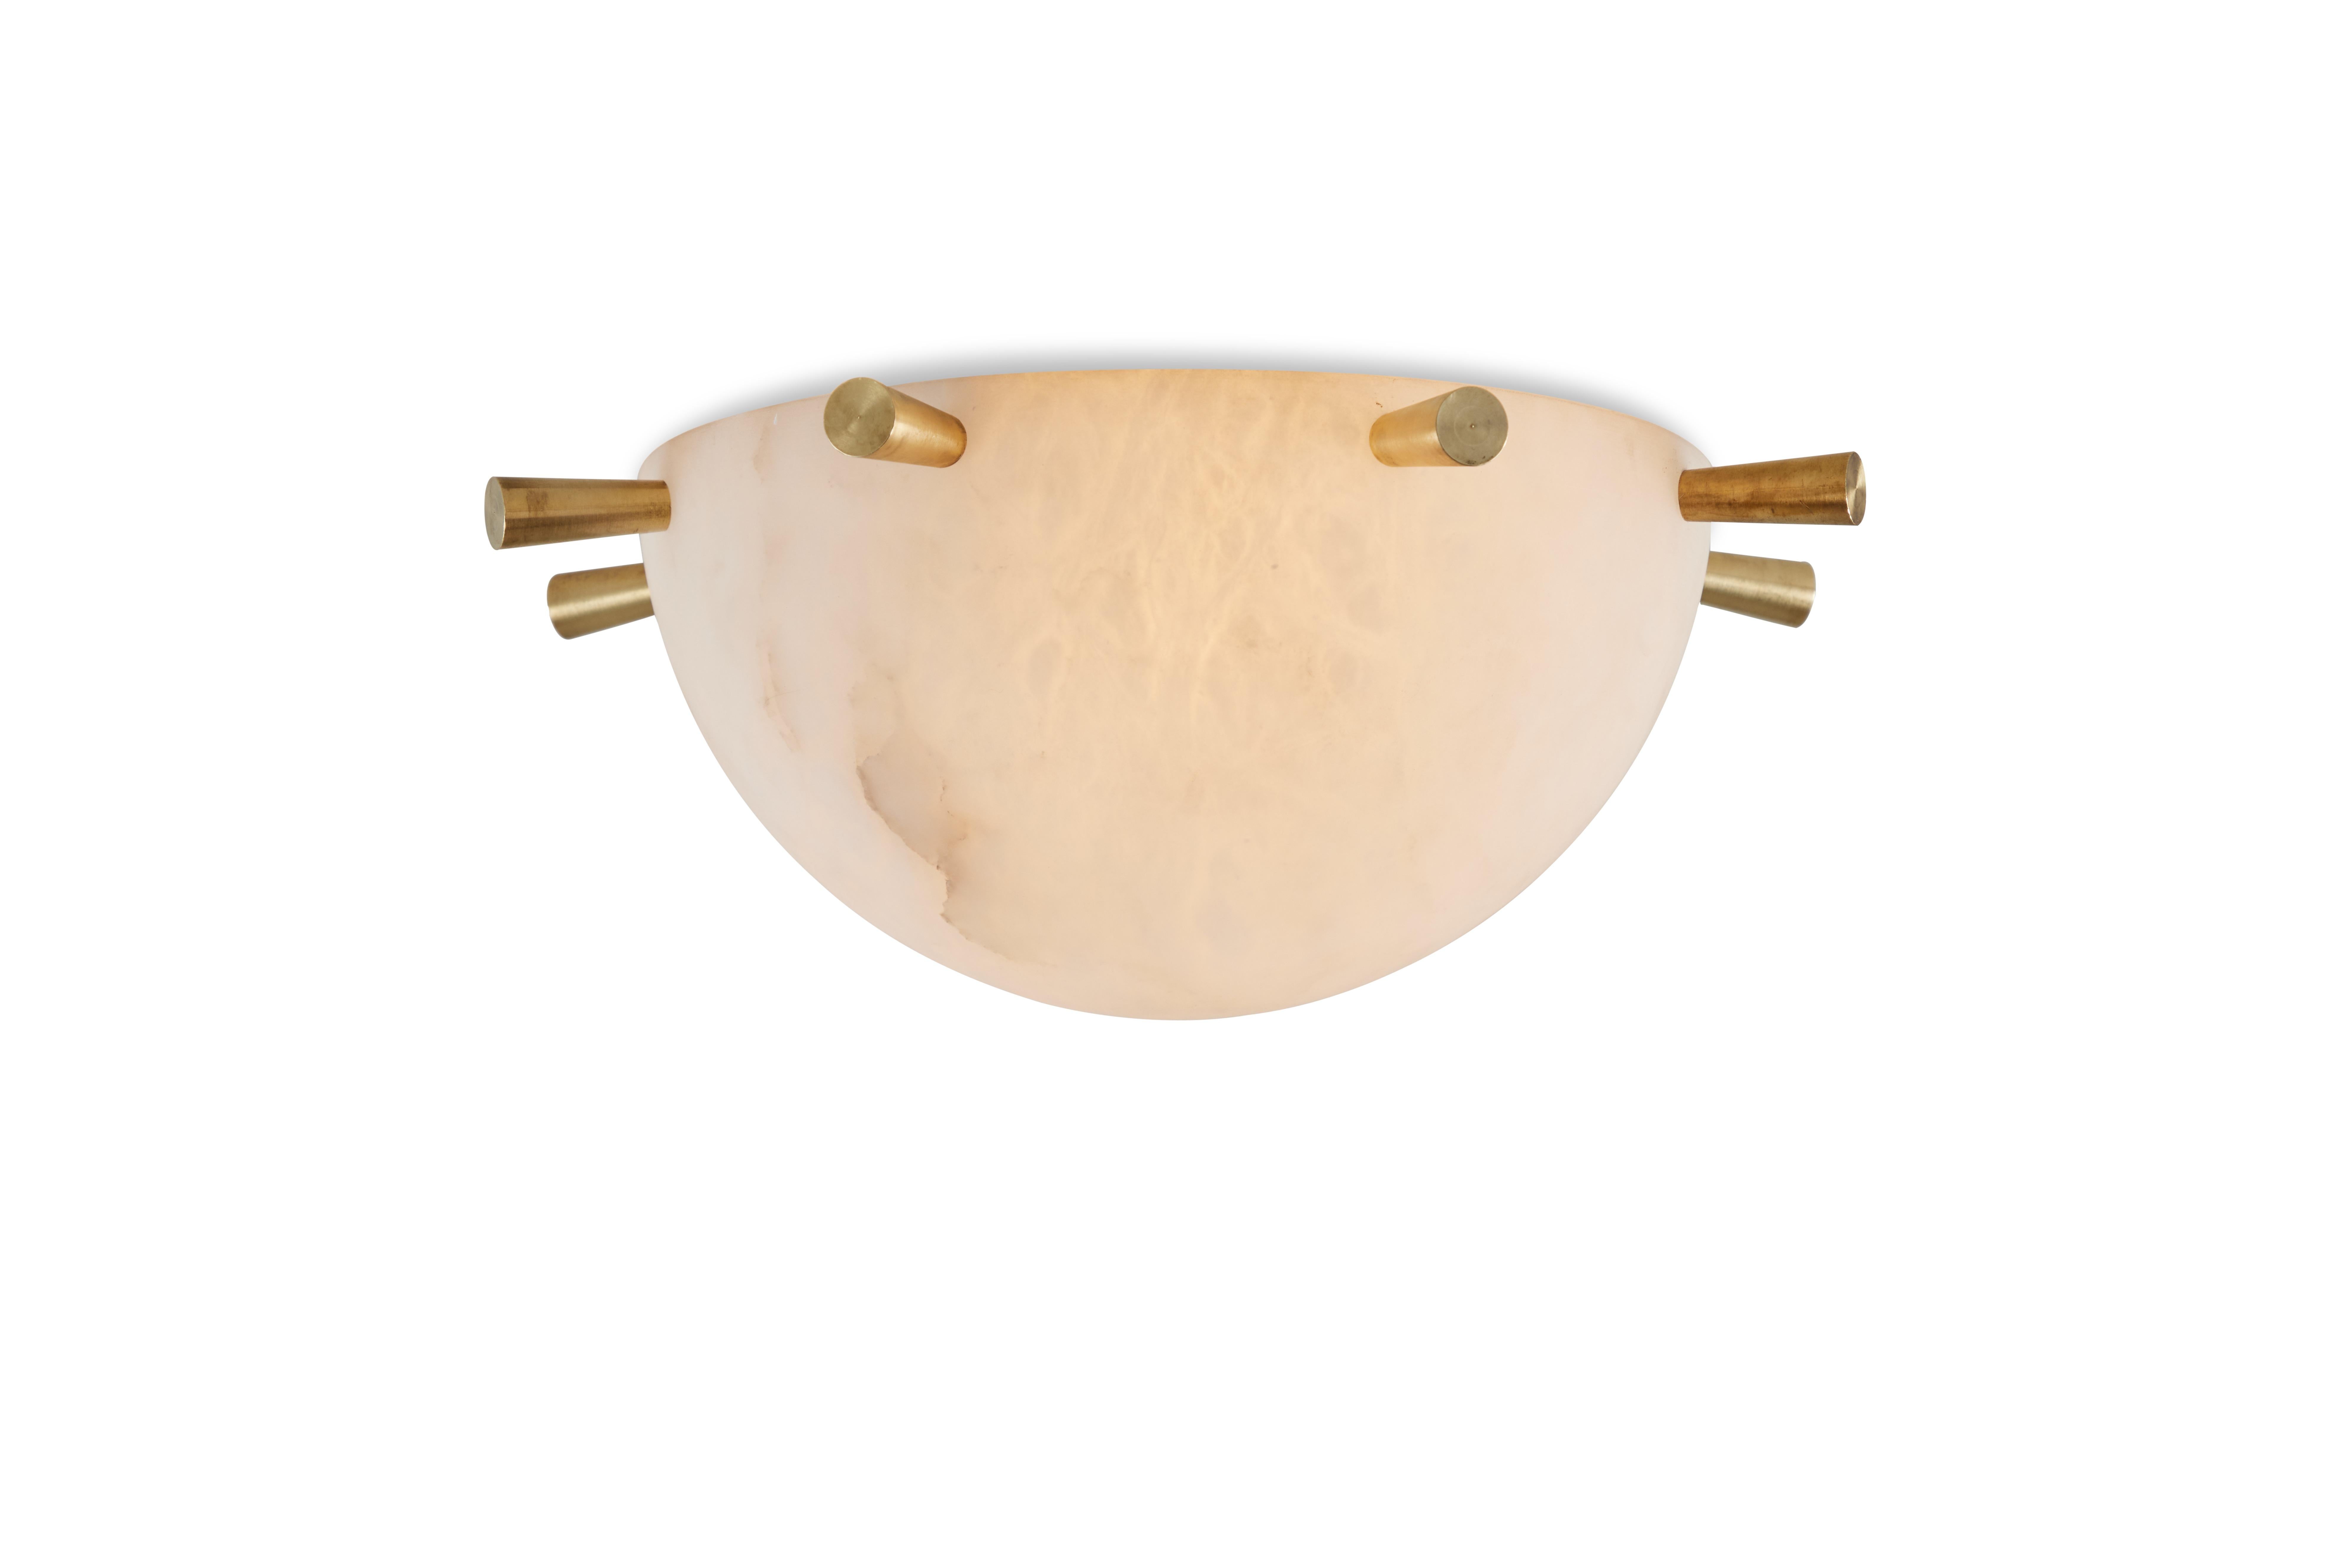 'Hat' alabaster and brass wall or ceiling Lamp by Denis de la Mesiere. Handcrafted in Los Angeles in the workshop of noted French designer and antiques dealer Denis de le Mesiere, who meticulously pays homage to the work of Pierre Chareau with